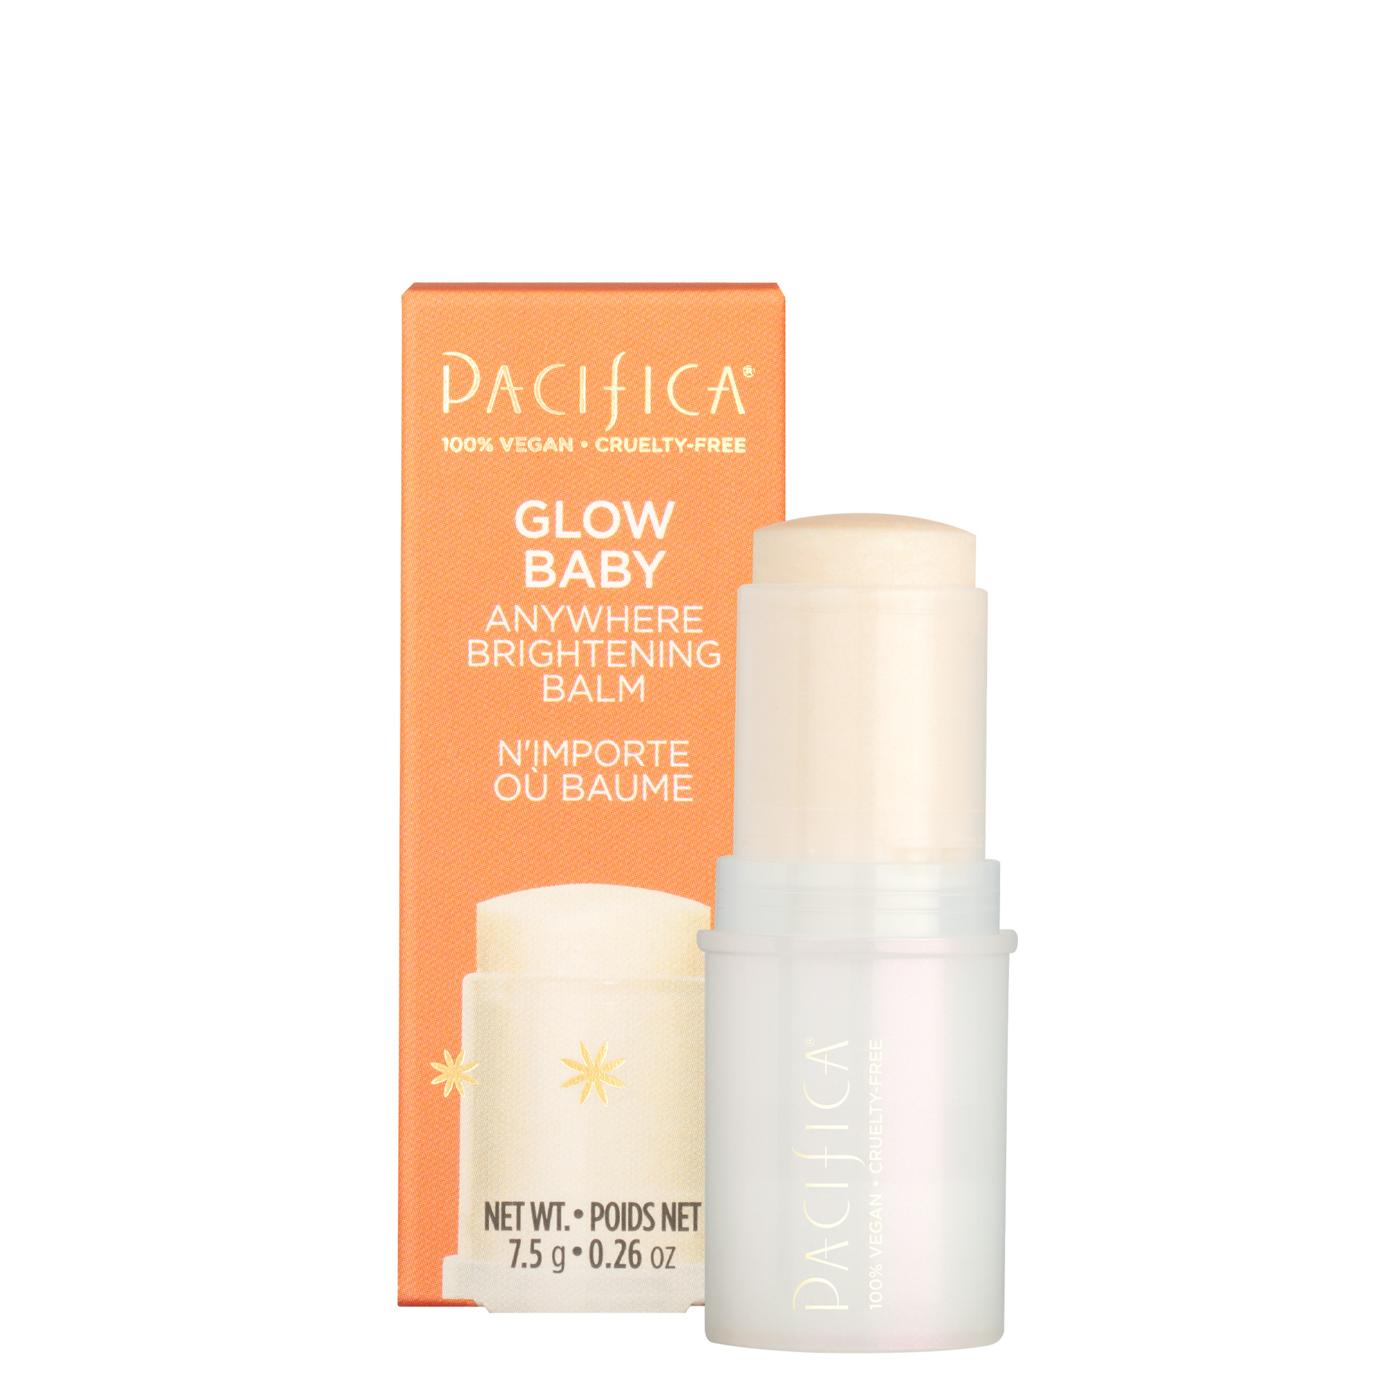 Pacifica Glow Baby Anywhere Brightening Balm; image 5 of 5